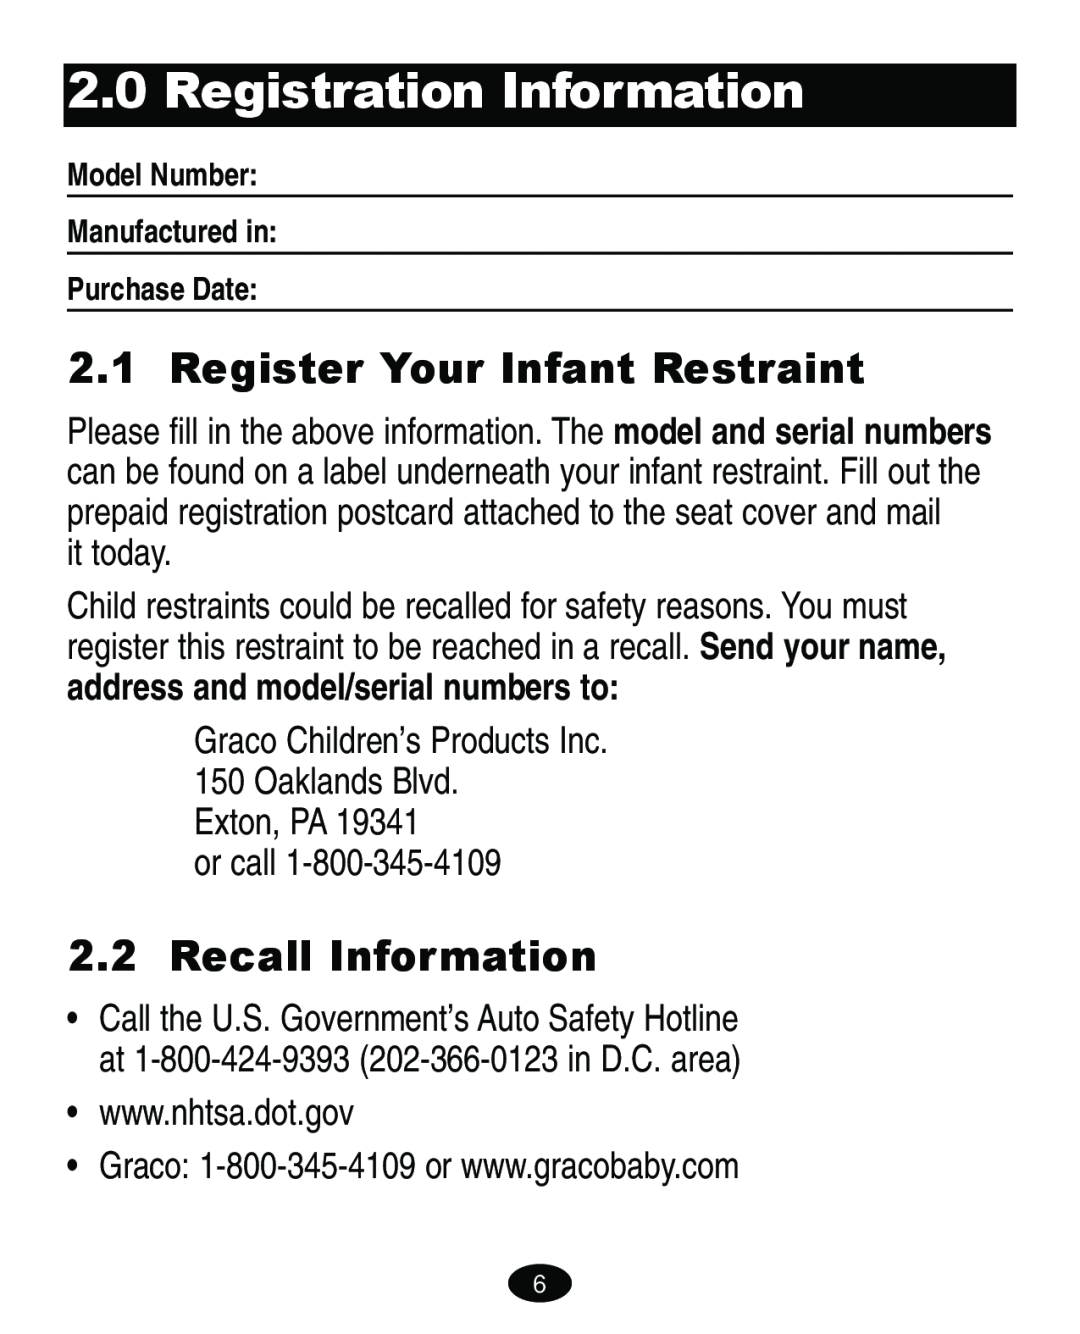 Graco ISPA113AA Registration Information, Register Your Infant Restraint, Recall Information, it today, Exton, PA or call 